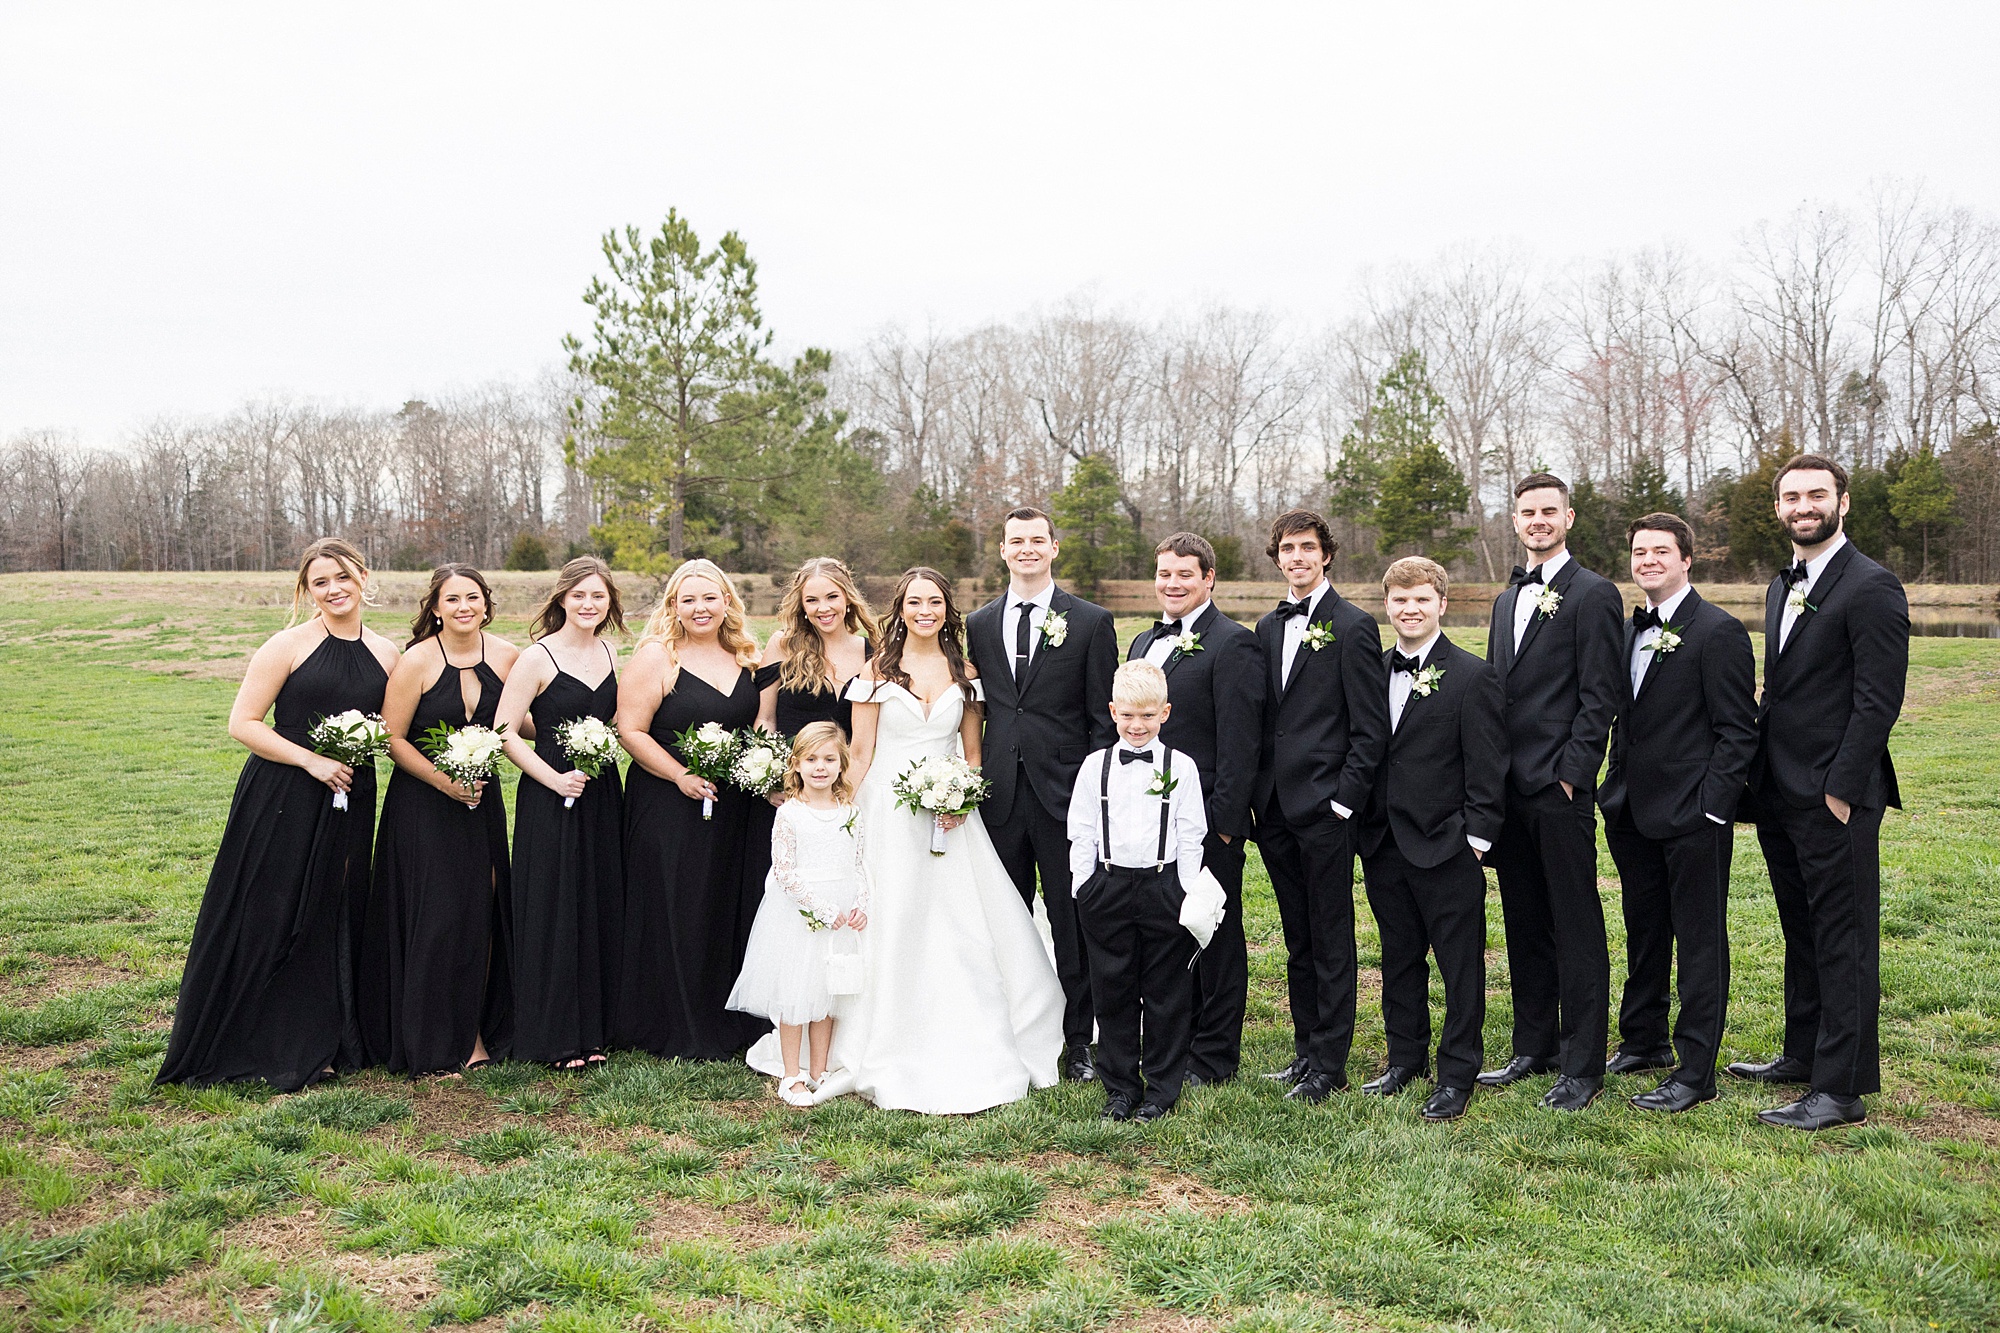 bride and groom pose with wedding party, ring bearer, and flower girl